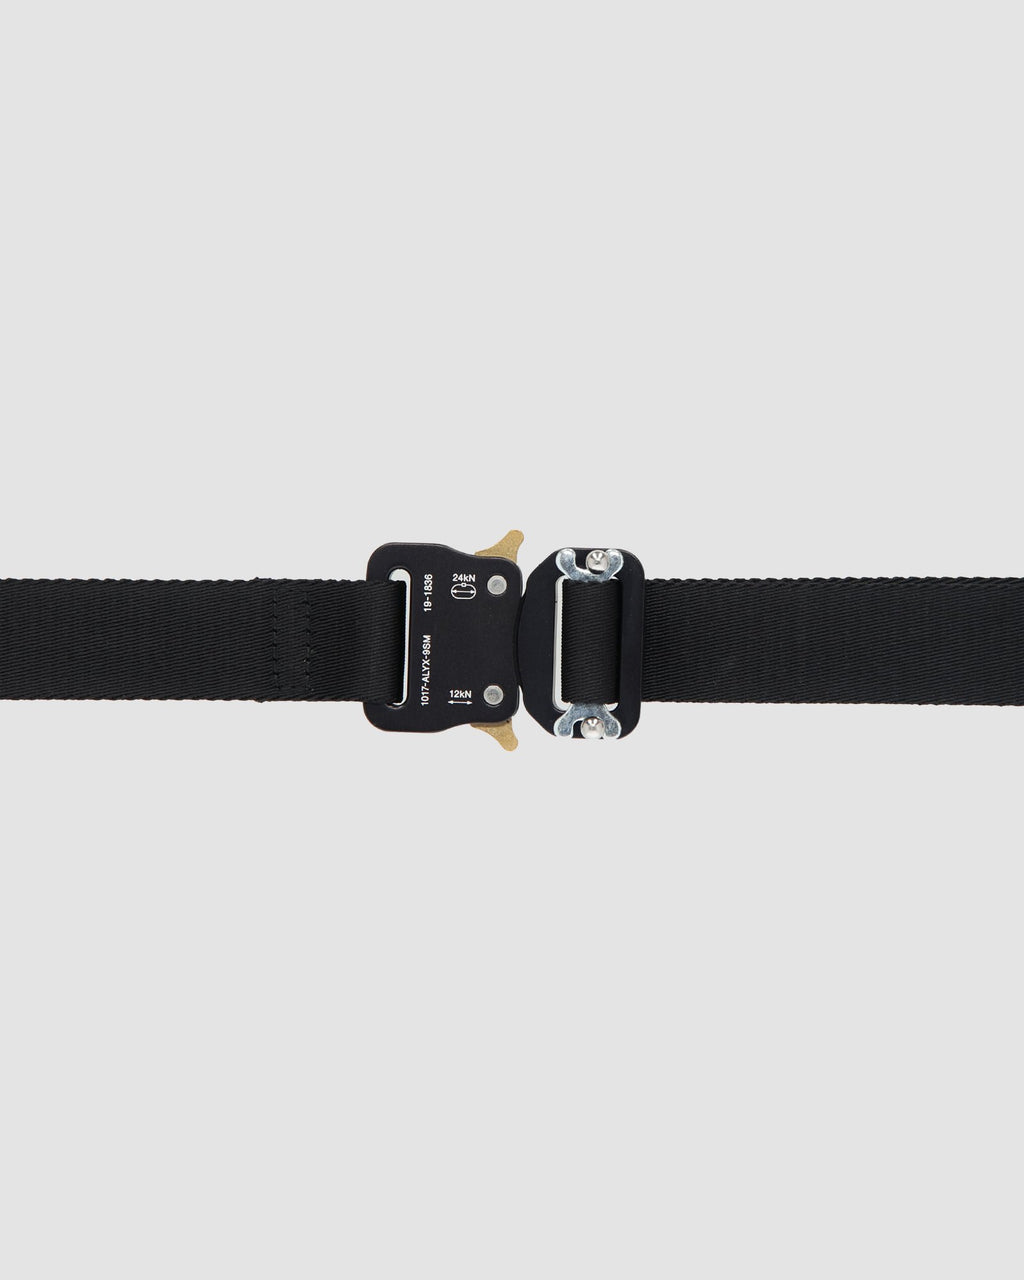 1017 ALYX 9SM | BELTS | Explore the latest collection of 1017 ALYX 9SM ...